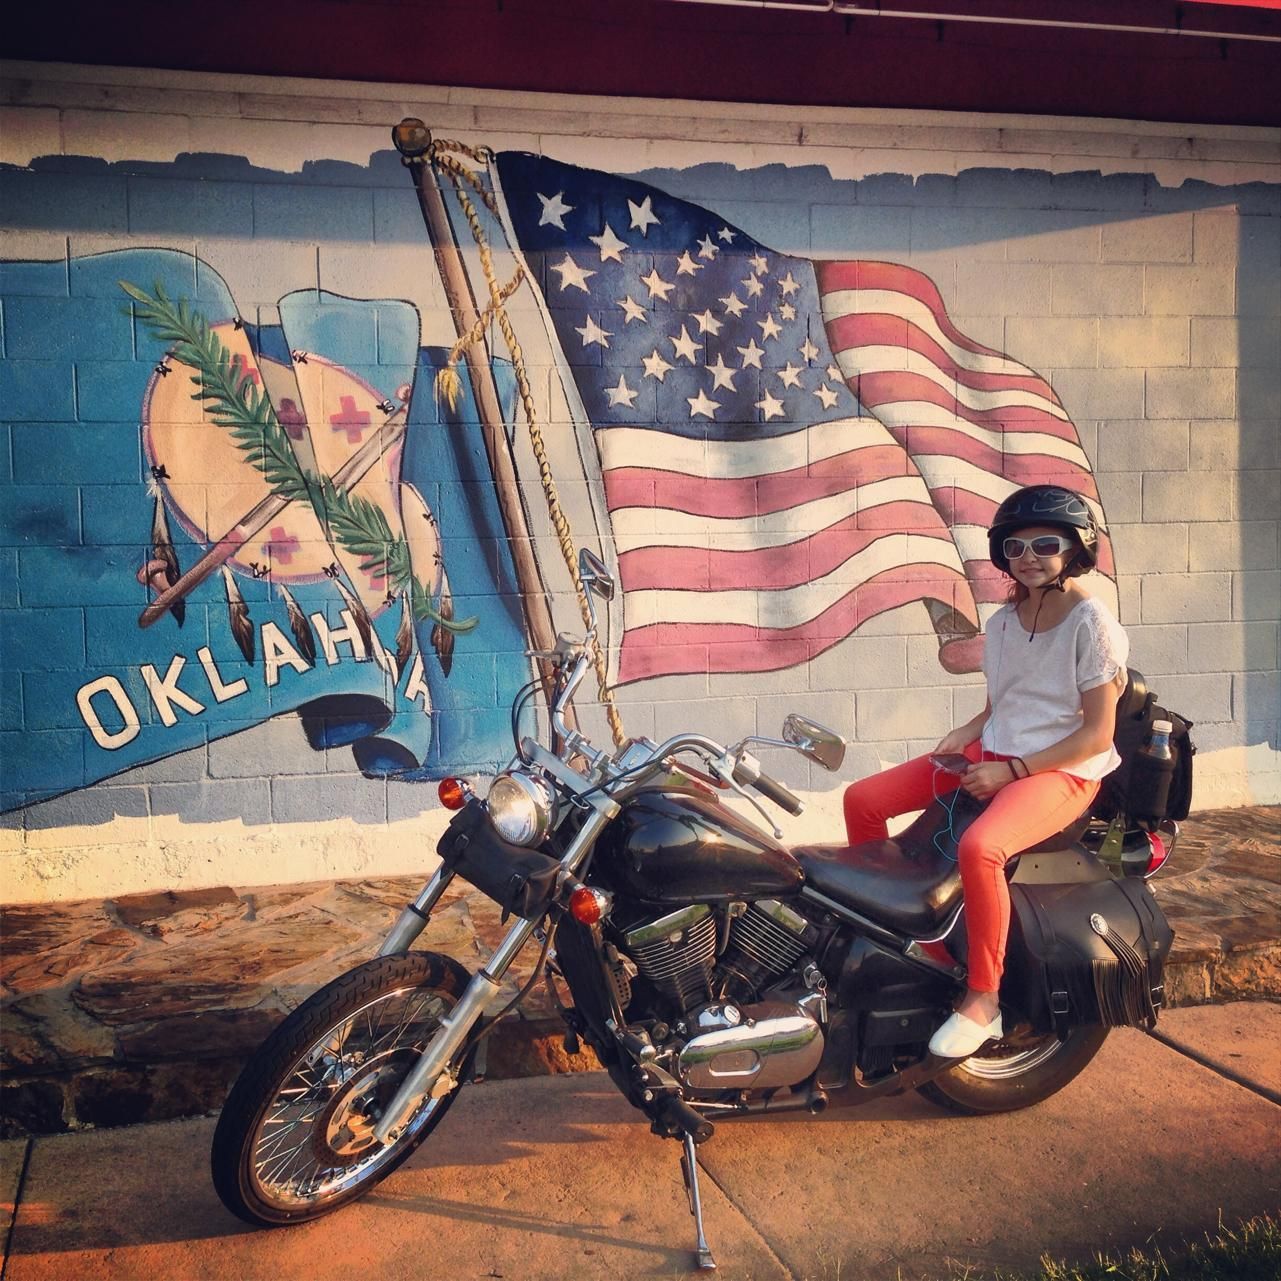 Shannon on Vulcan in Chicashaw, OK